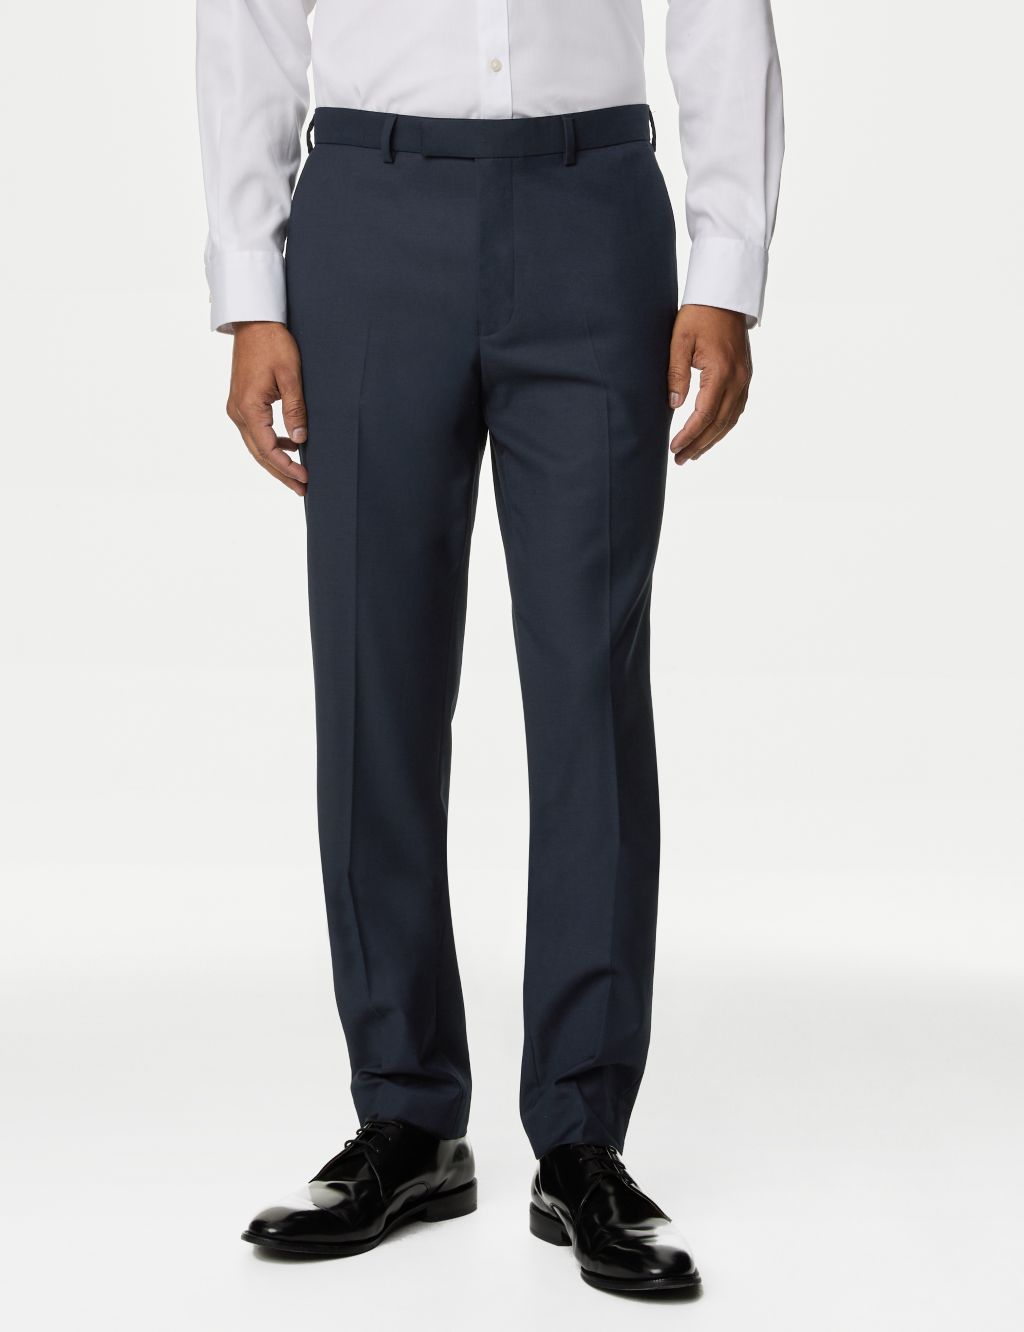 Slim Fit Stretch Suit Trousers image 1